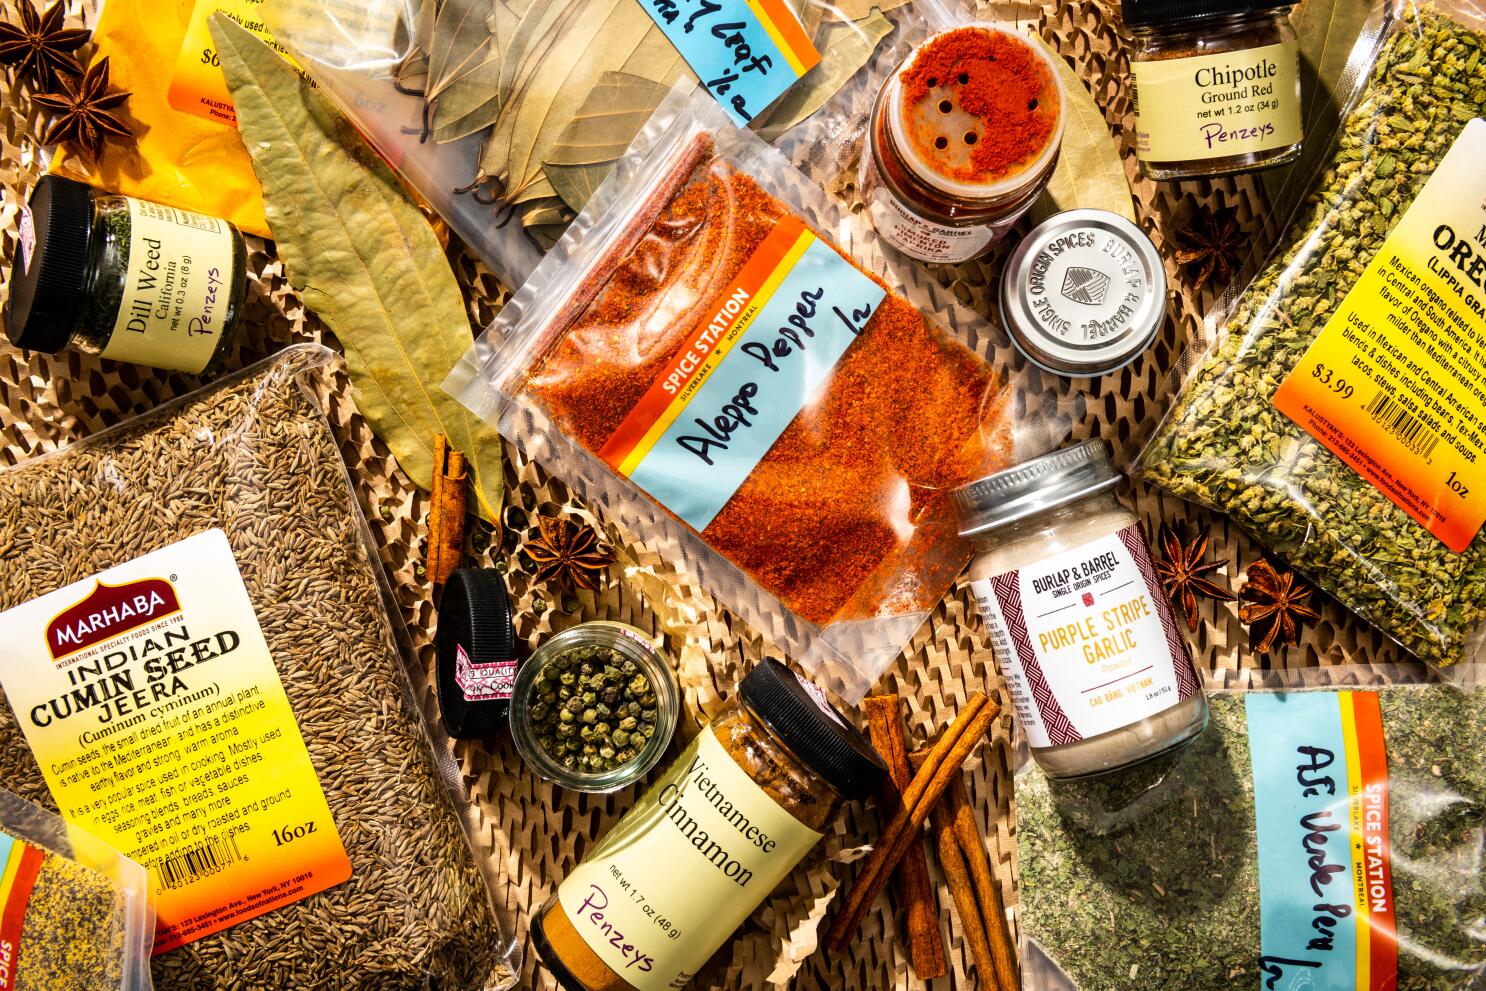 Spice Islands Seasonings and Spices - High Quality Spices